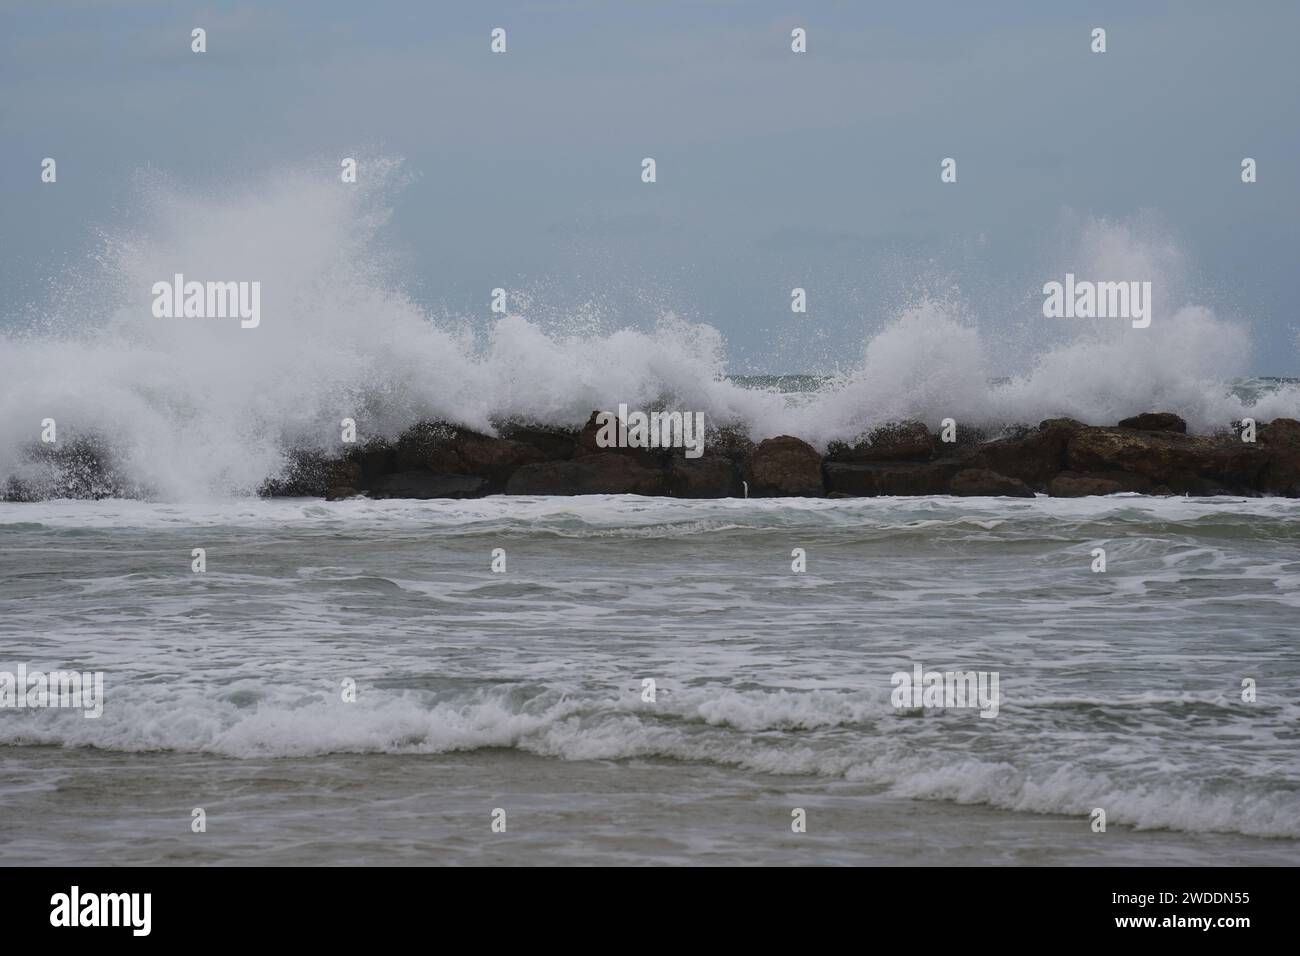 Strong currents and waves in the sea. Waves successfully crash into the stone breakwater. Stock Photo